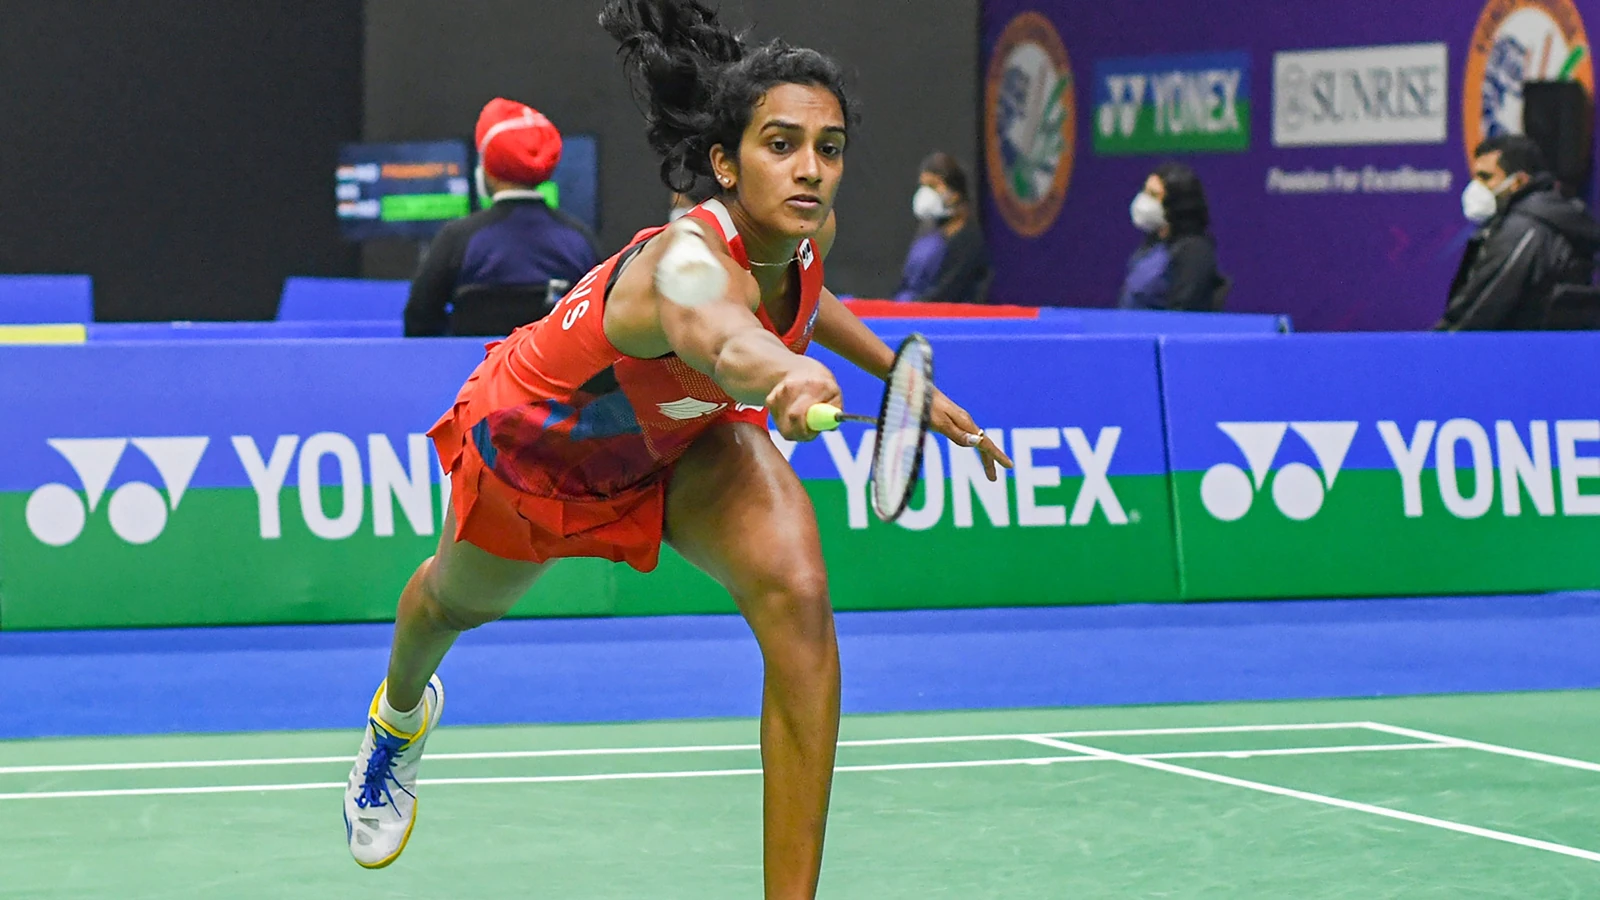 Swiss Open: PV Sindhu, Kidambi Srikanth look to find top form; Lakhsya Sen opts out